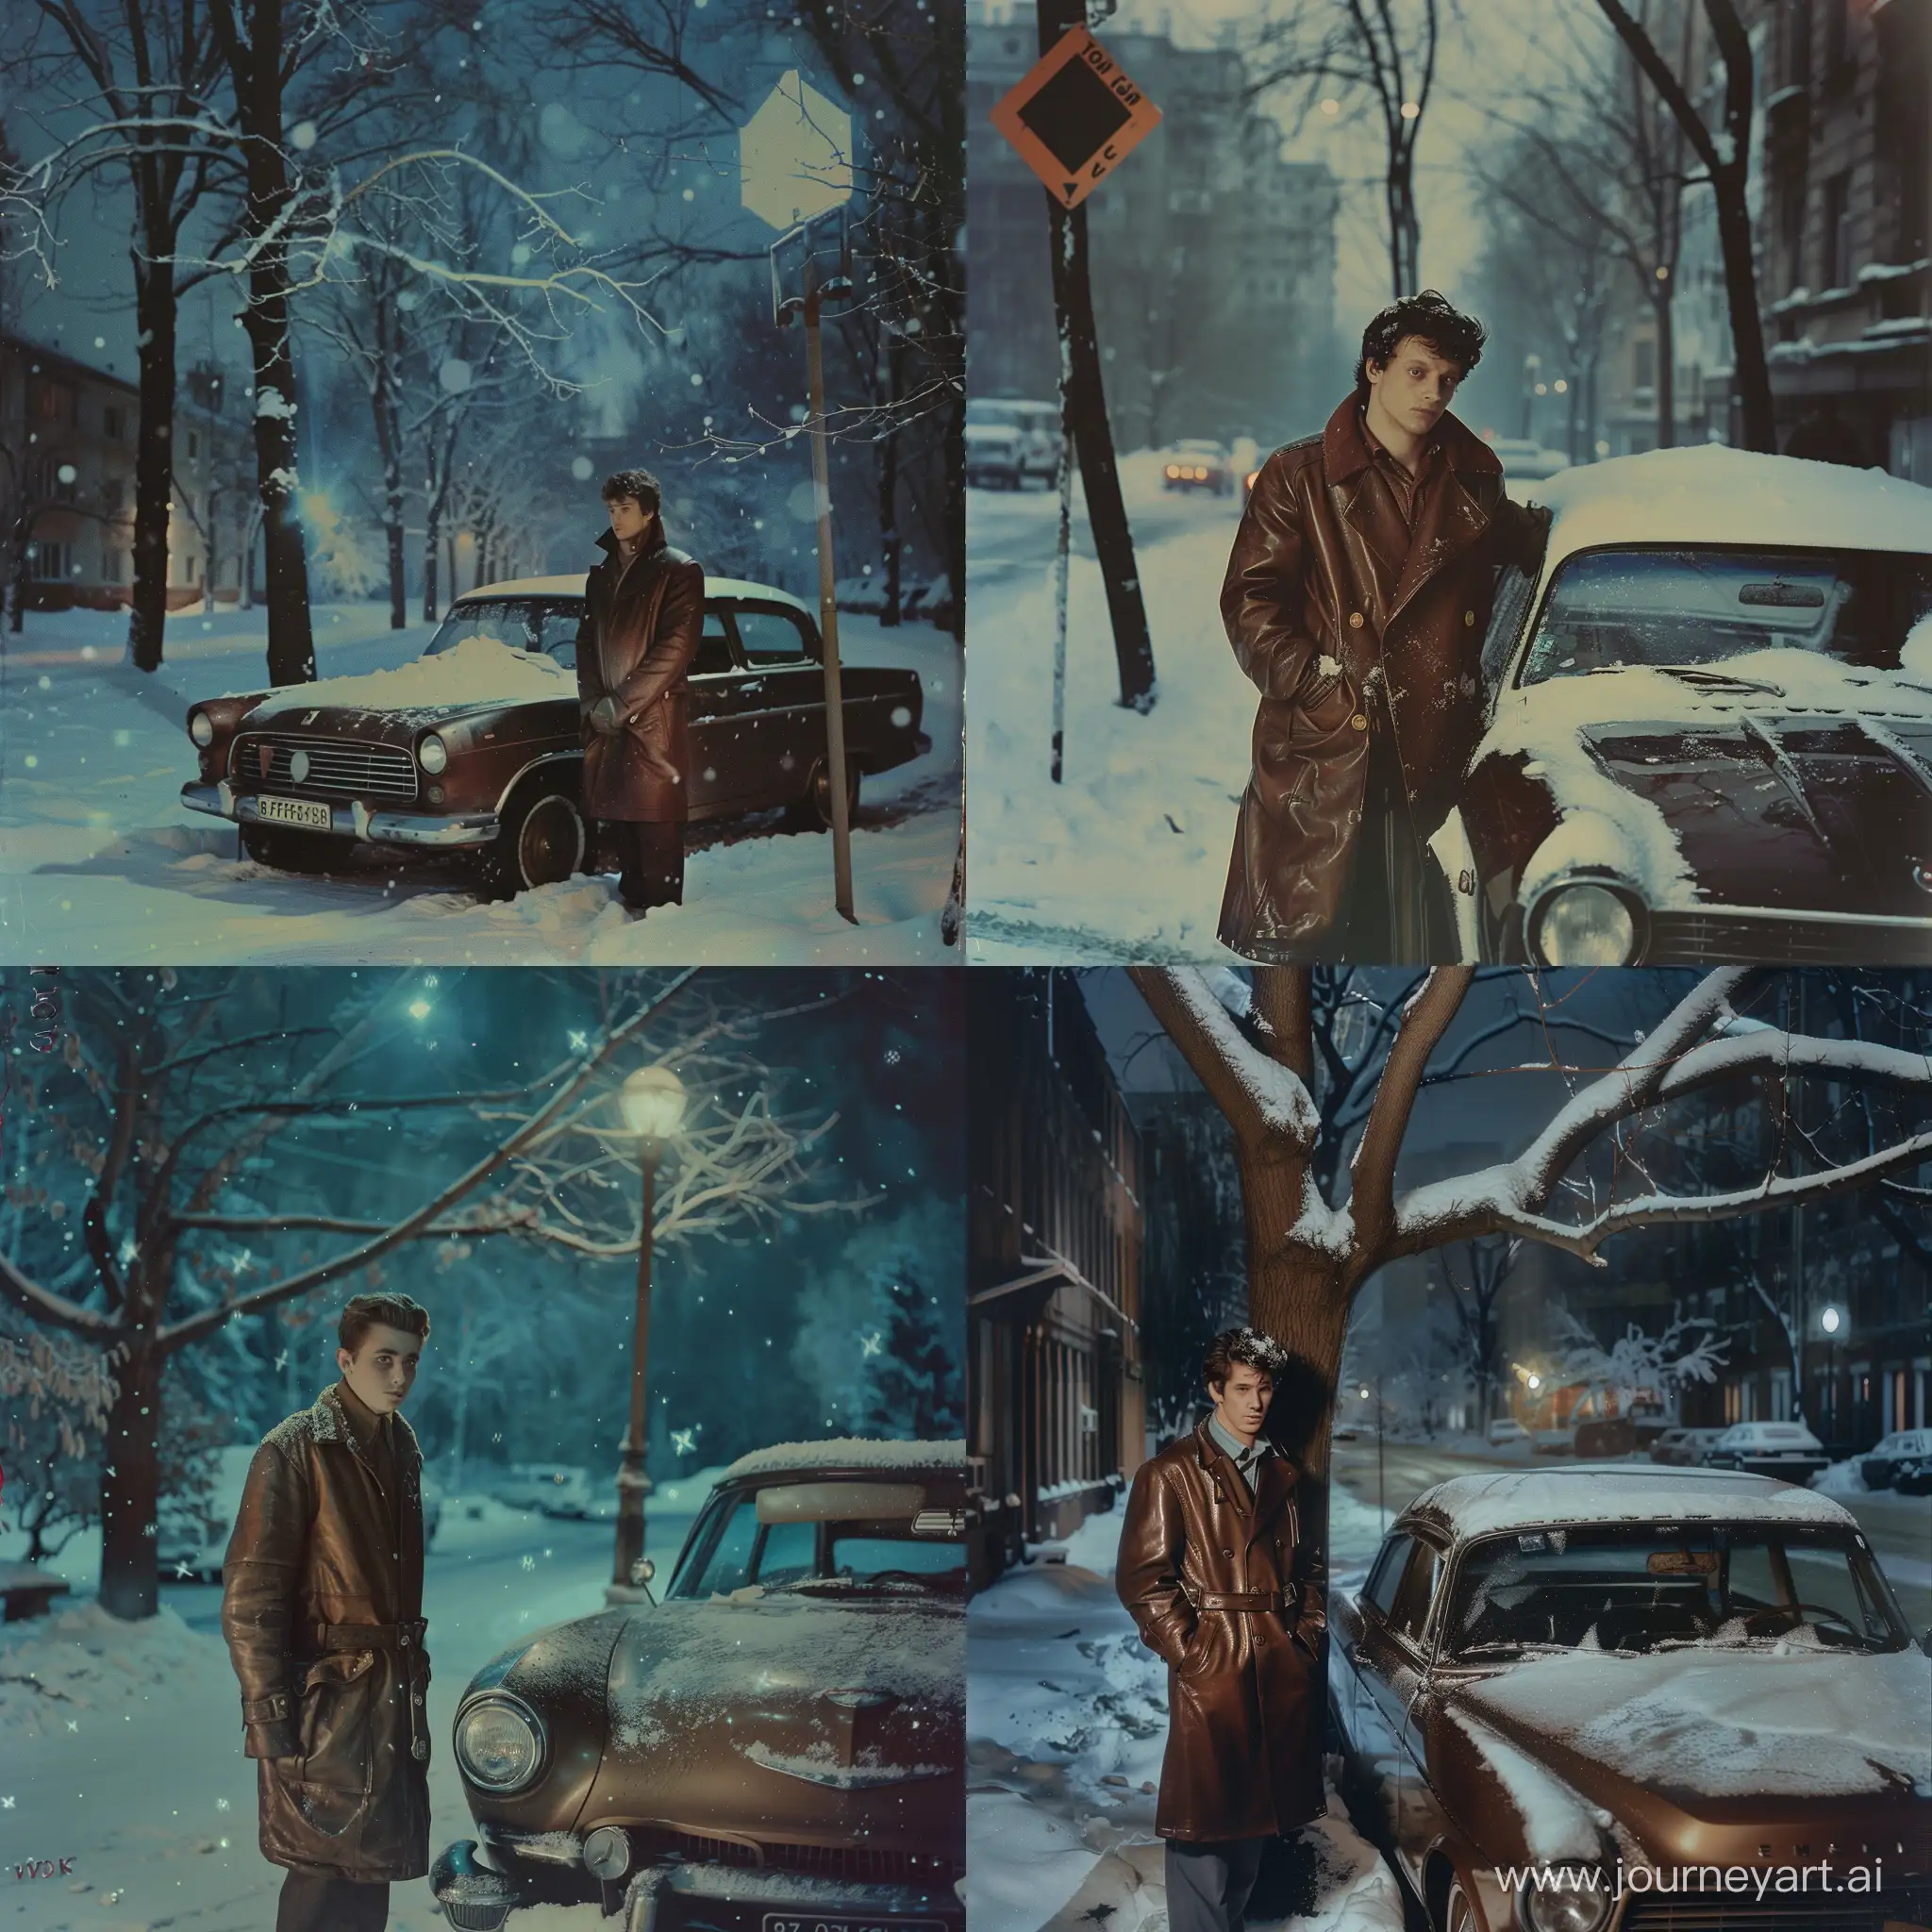 a man standing next to a parked car in the snow, an album cover, tonalism, wearing a brown leather coat, perfectly lit. movie still, ffffound, volodymyr zelenskyy, young simon baker, wide open city ”, kodachrome 8 k, star